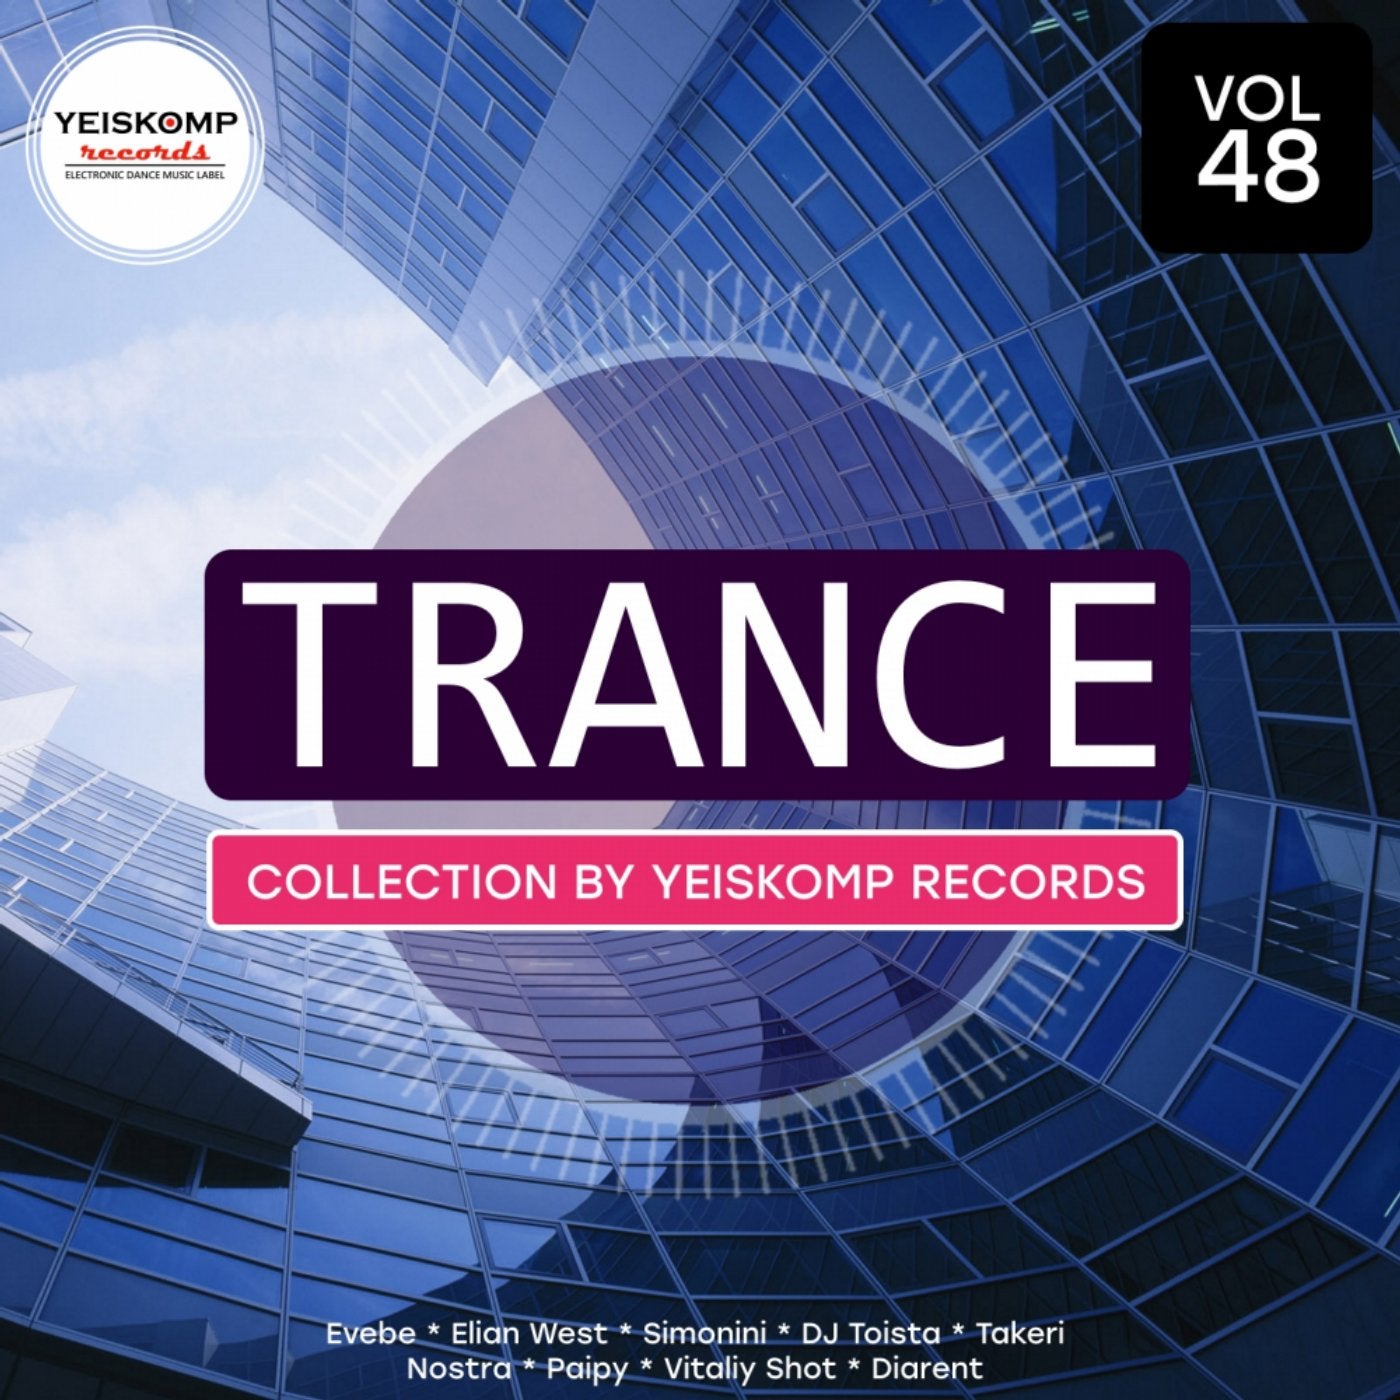 Trance Collection by Yeiskomp Records, Vol. 48